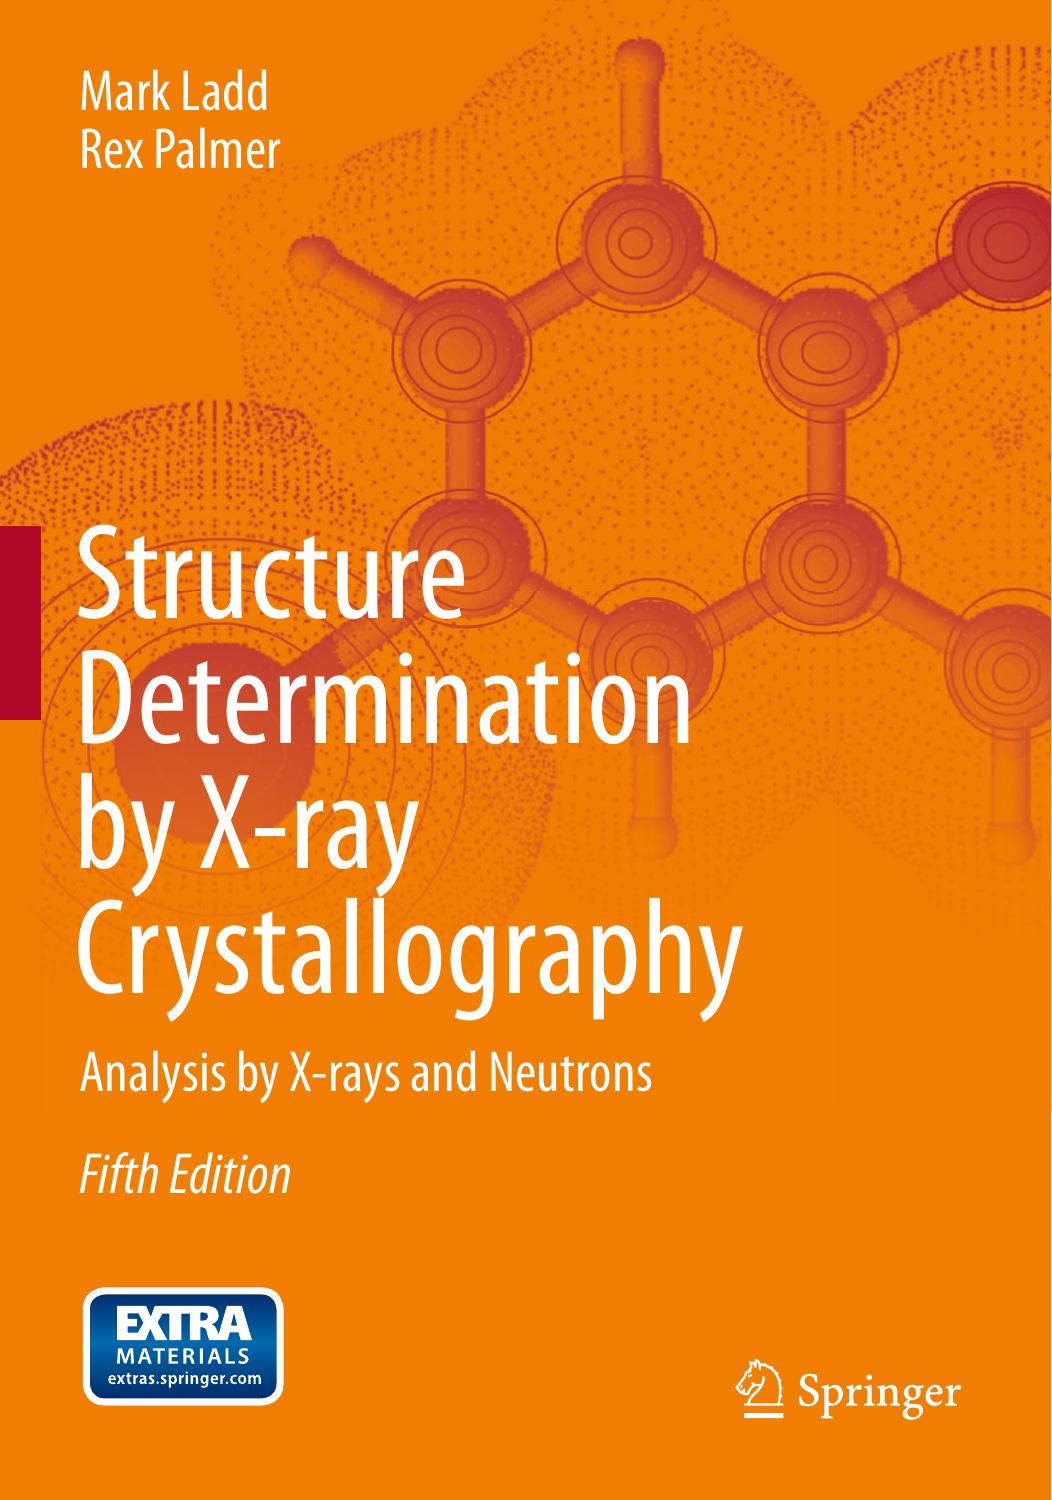 Structure Determination by X-ray Crystallography Analysis by X-rays and Neutrons 2013